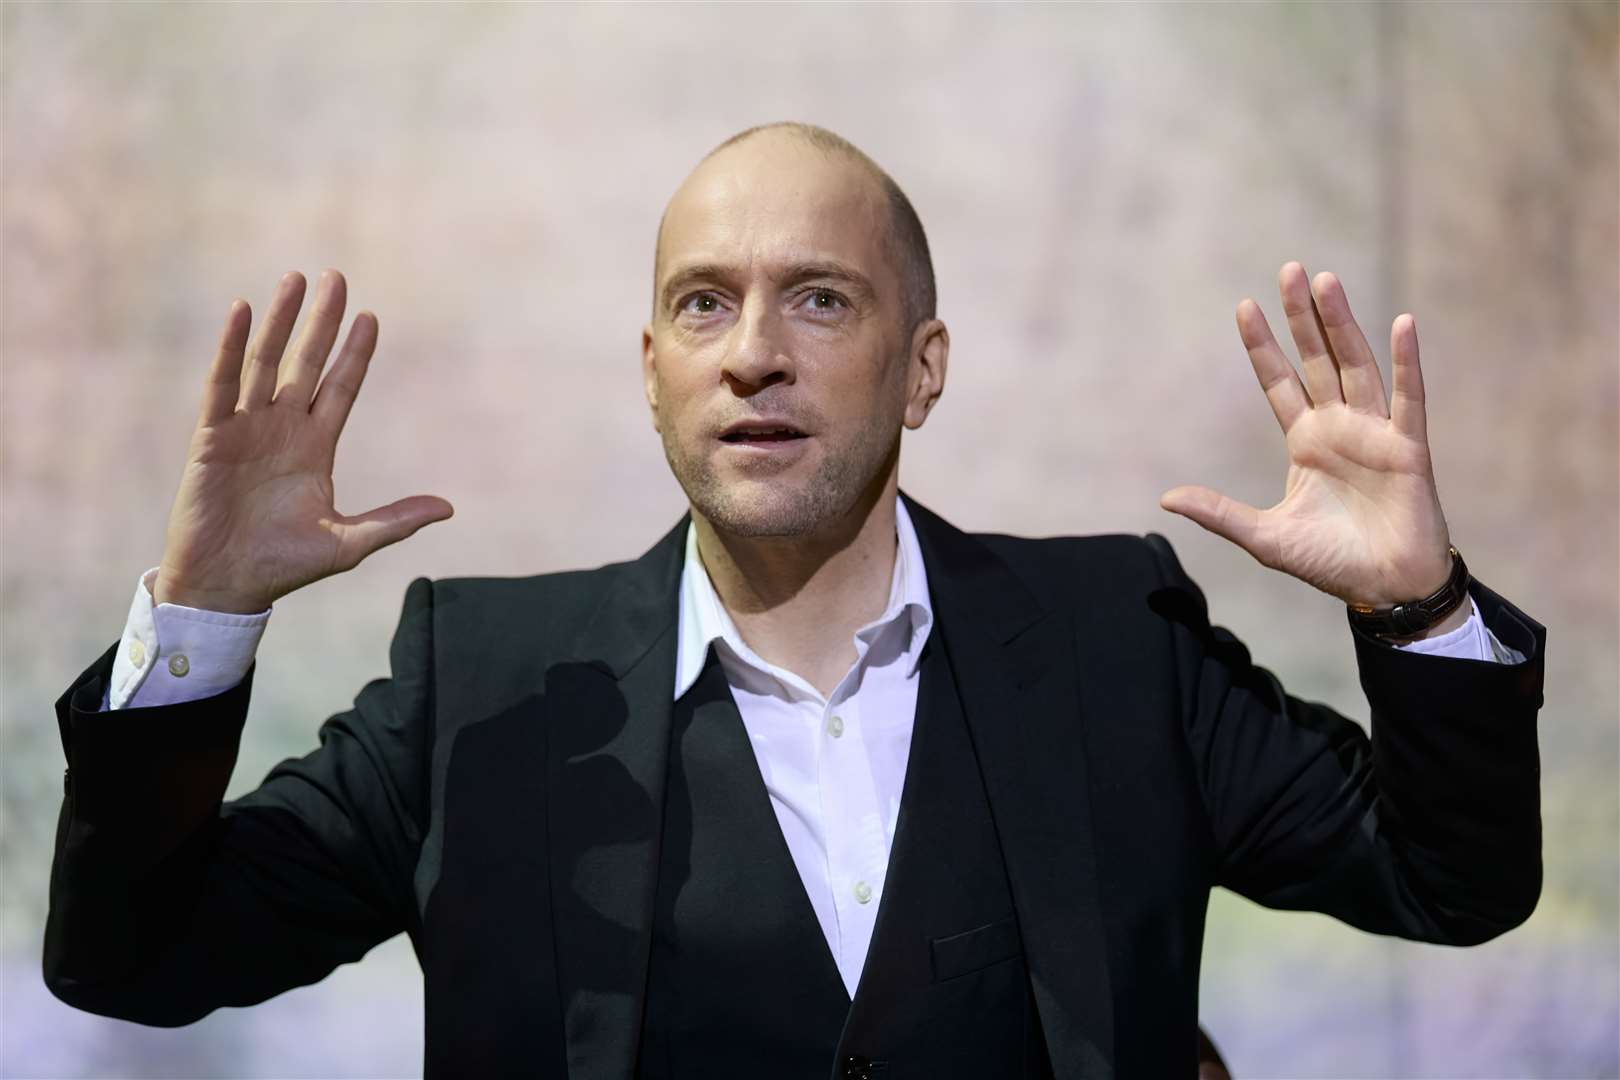 Derren Brown showcases a mix of of mind-control, suggestion, illusion and, of course, showmanship.